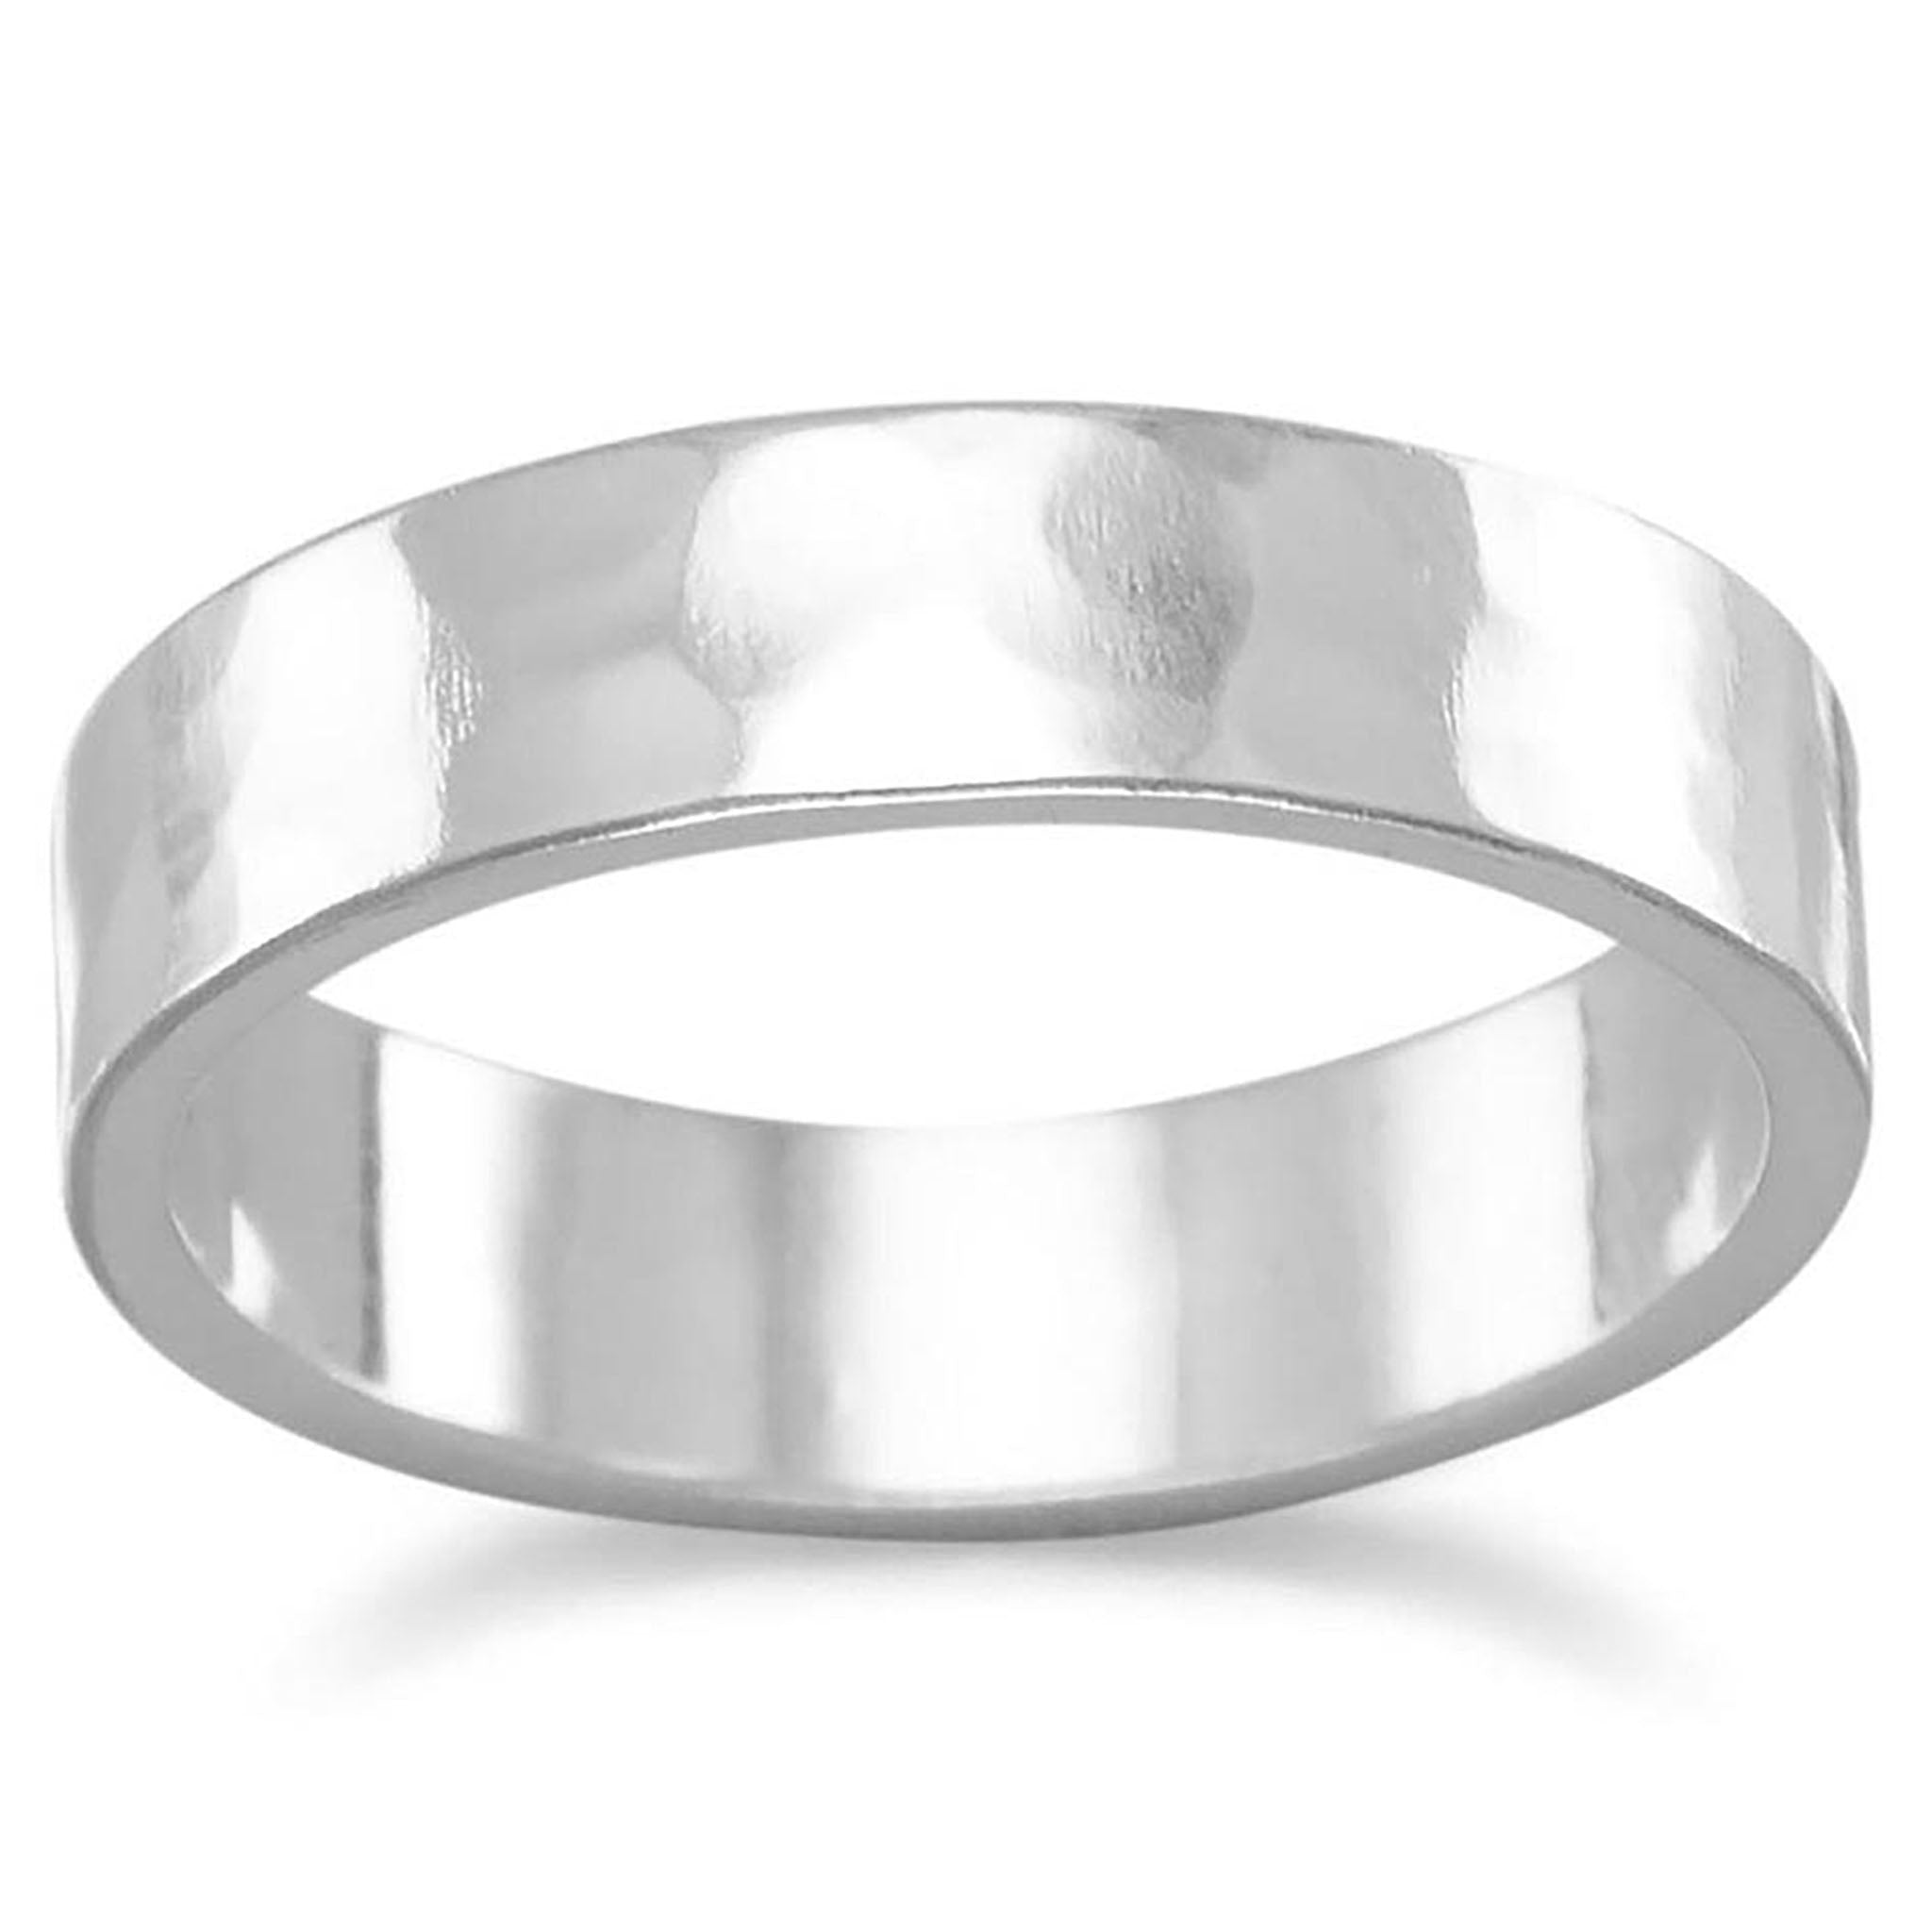 Hammered 5mm Silver Ring